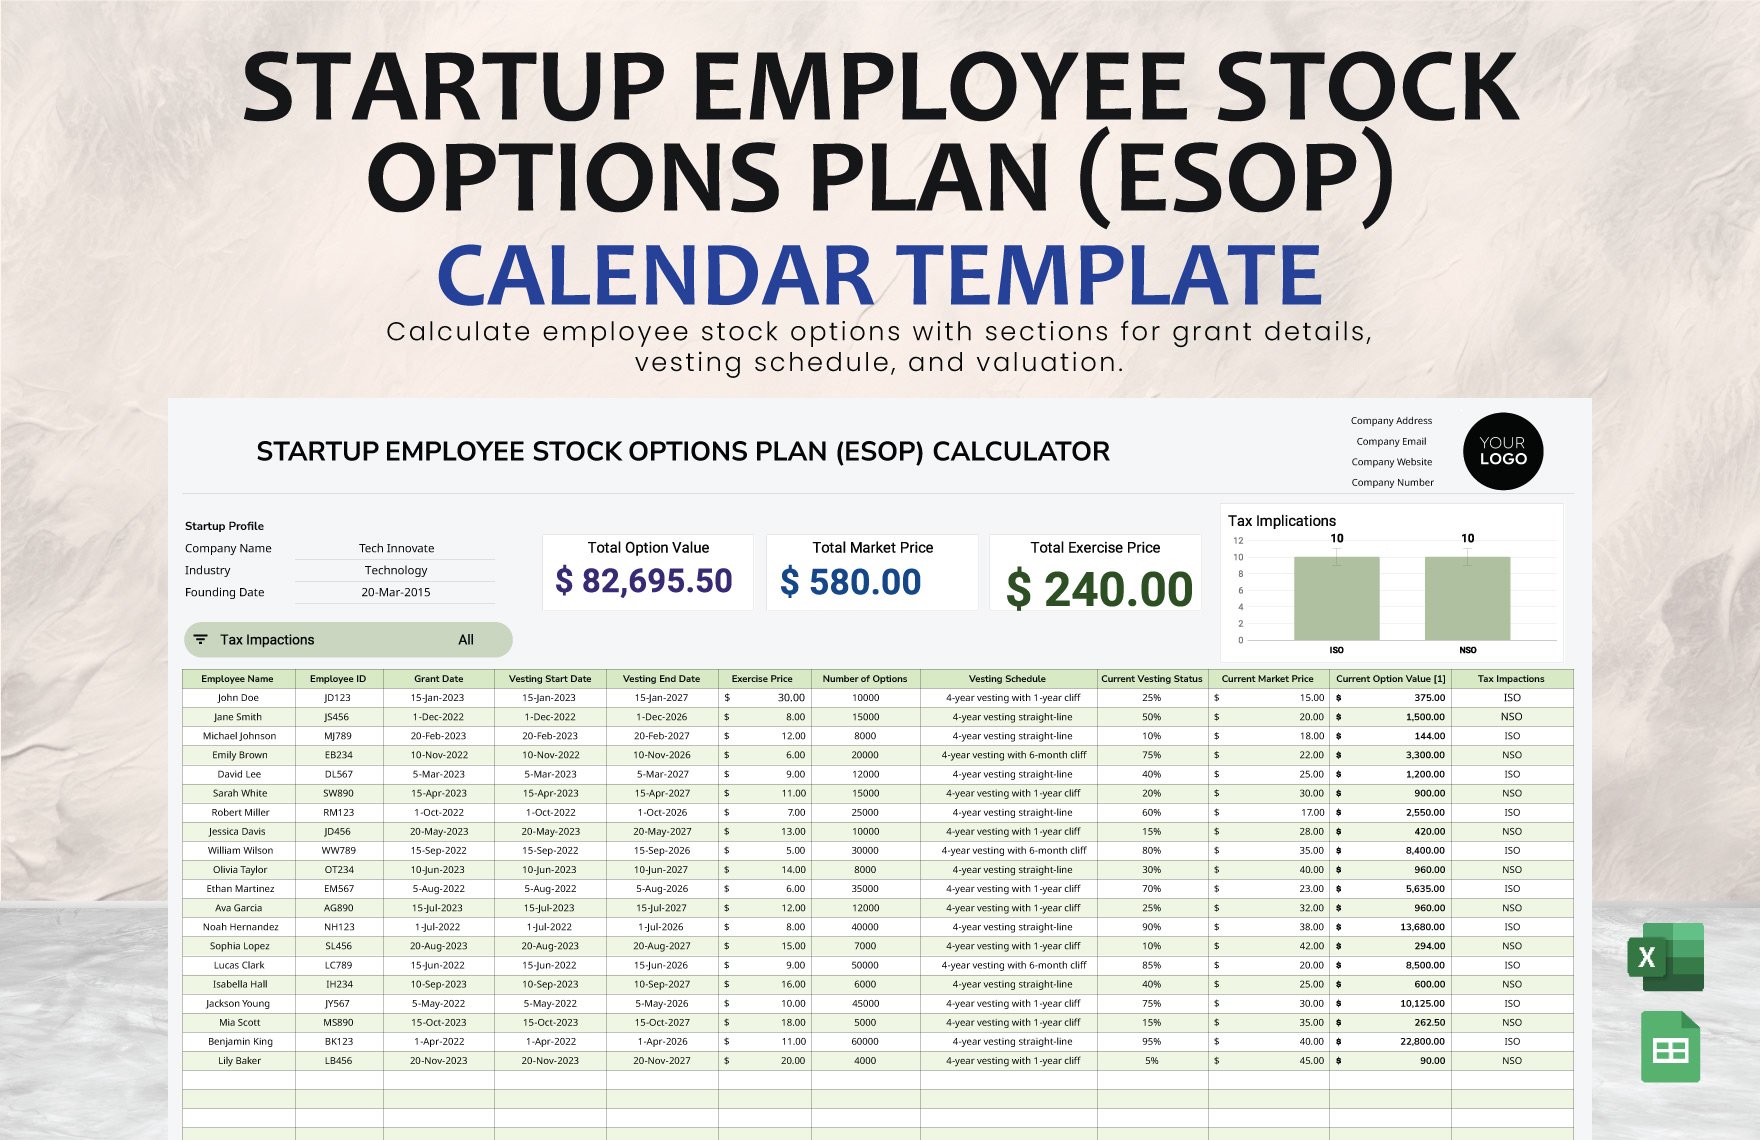 Startup Employee Stock Options Plan (ESOP) Calculator Template in Excel, Google Sheets